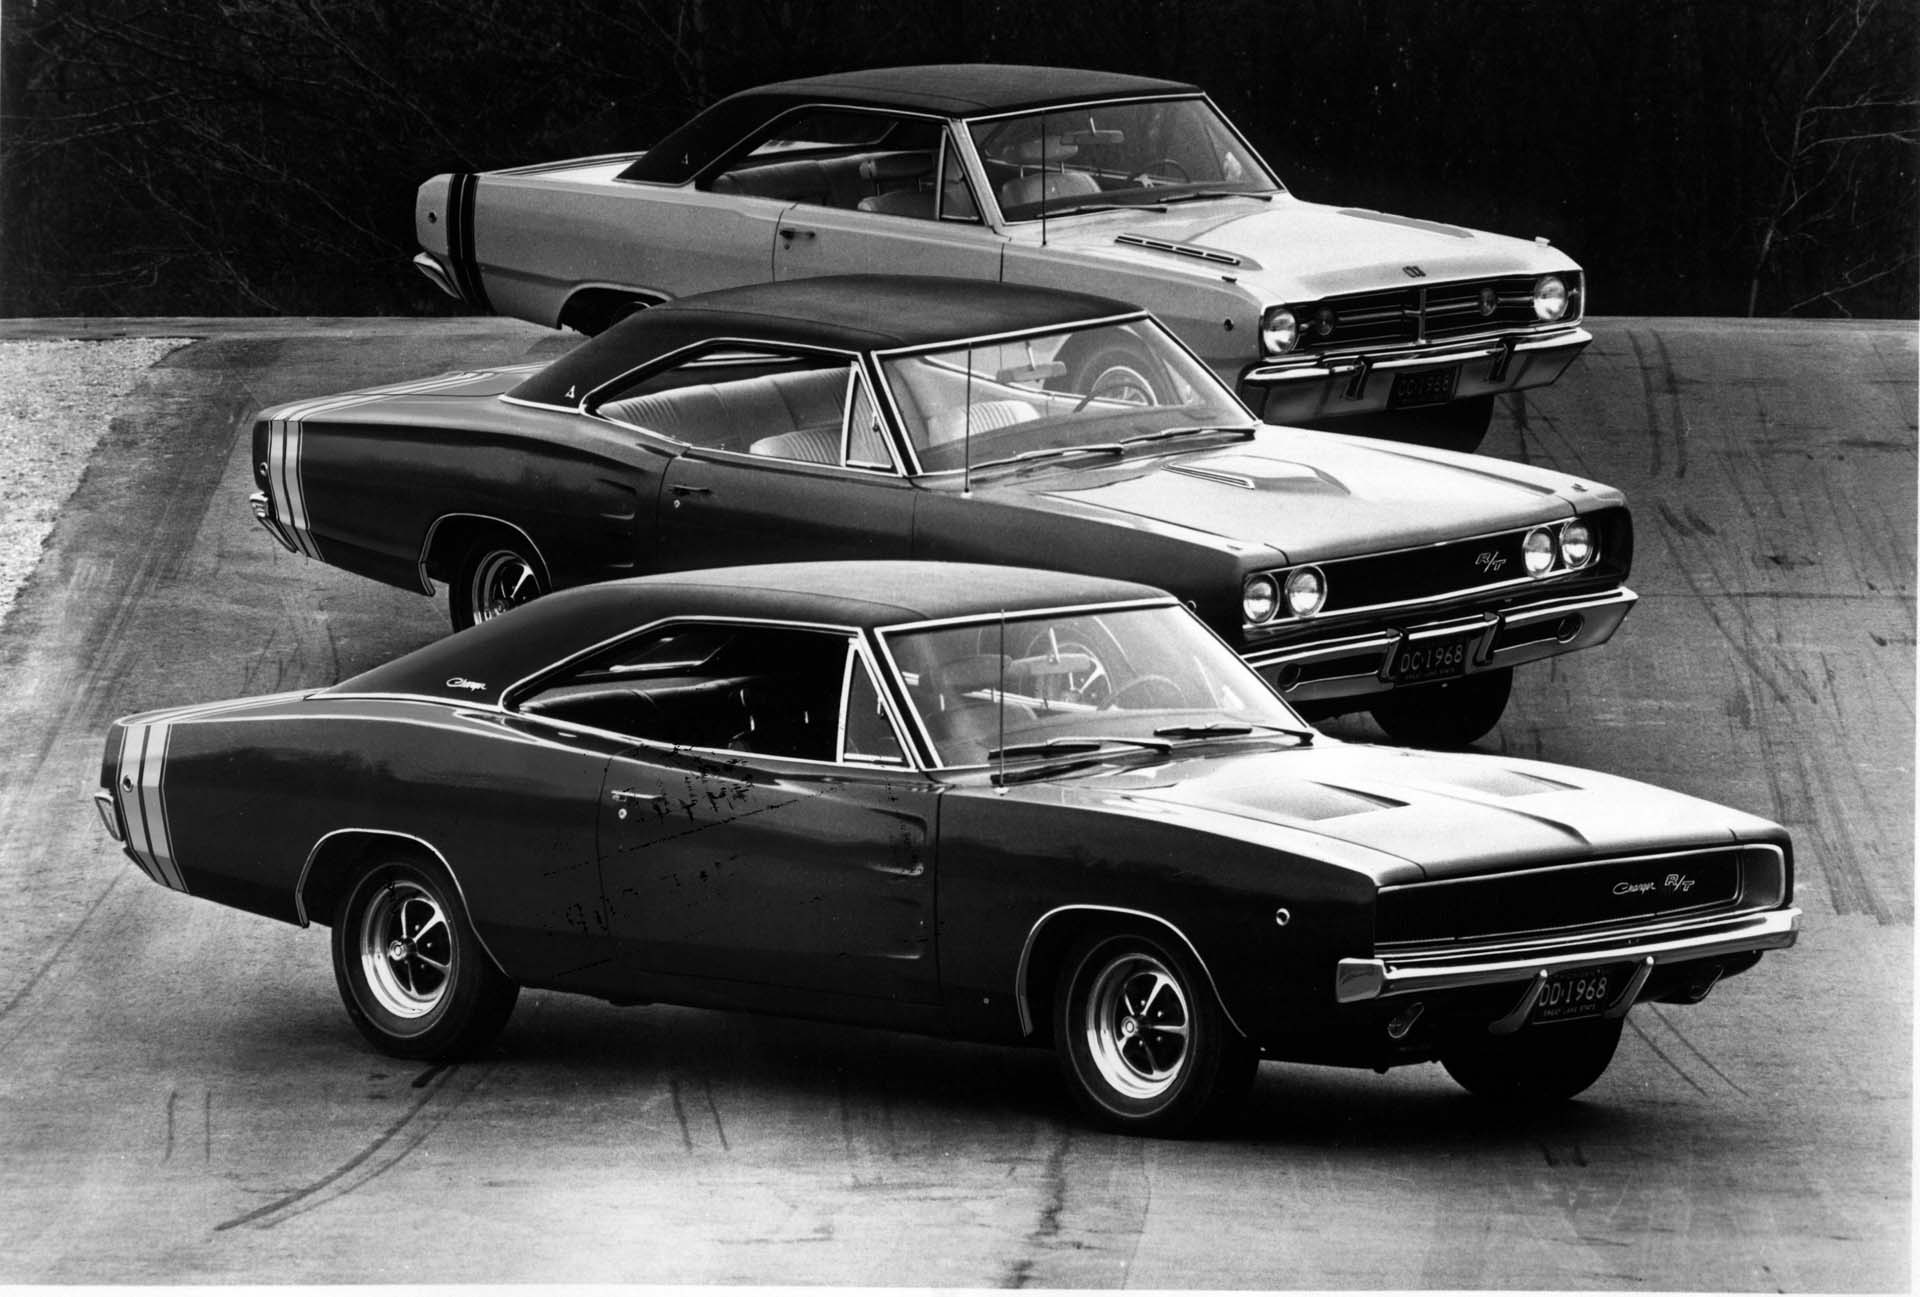 1968 Dodge Charger Wallpapers - 1969 Dodge Charger Scat Pack - HD Wallpaper 